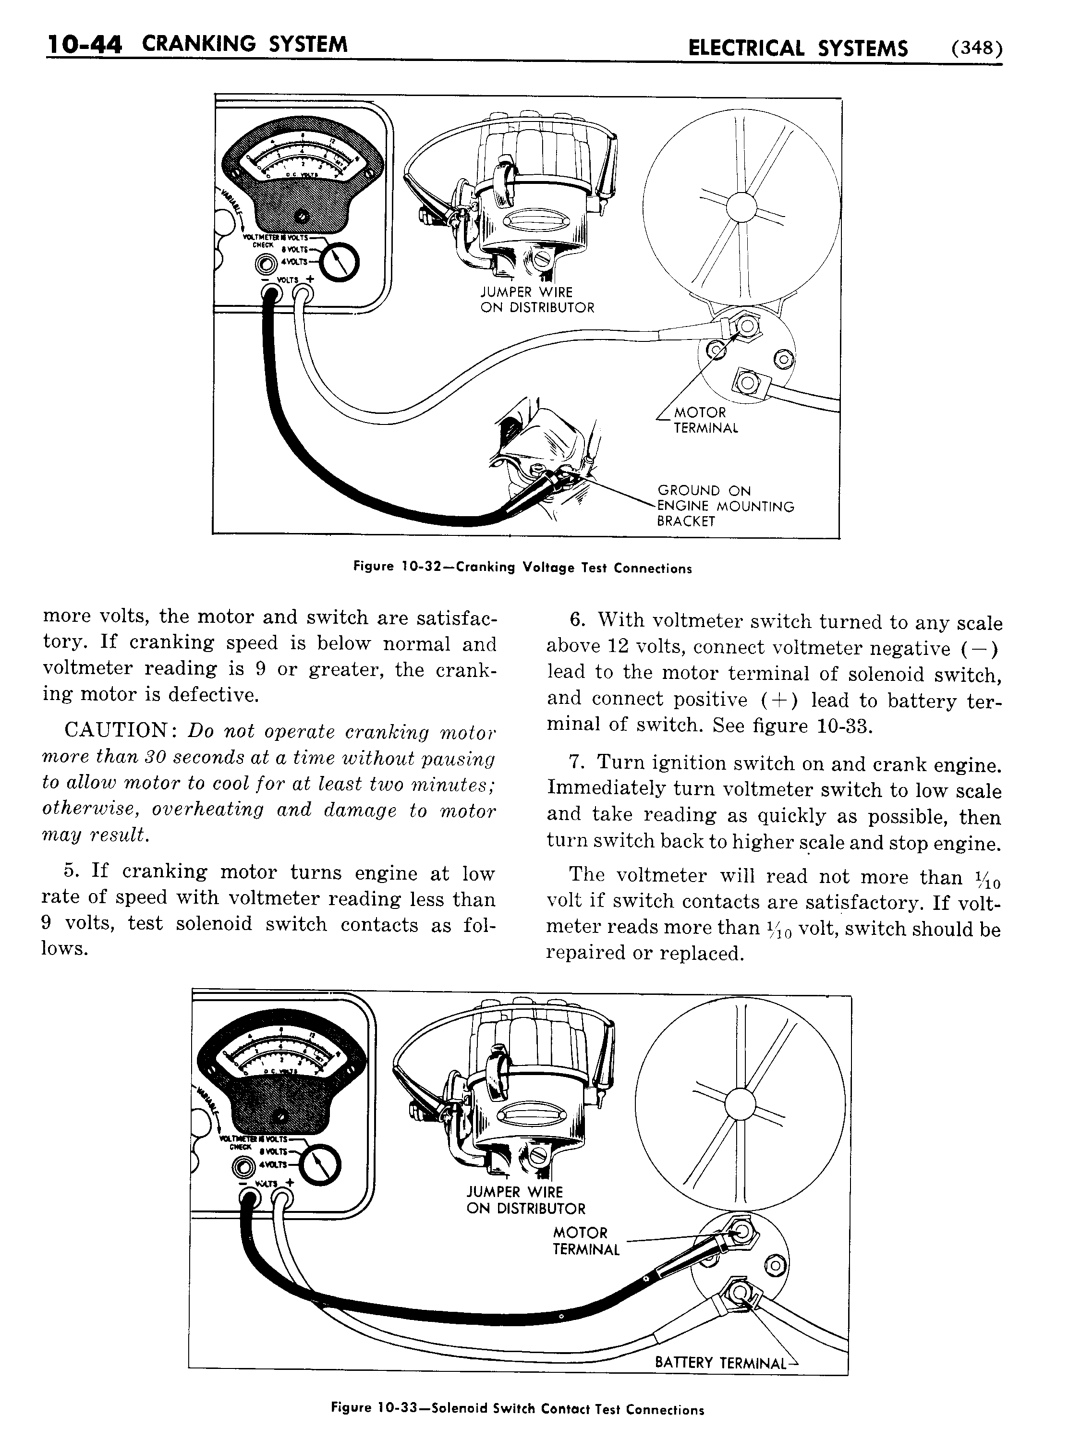 n_11 1955 Buick Shop Manual - Electrical Systems-044-044.jpg